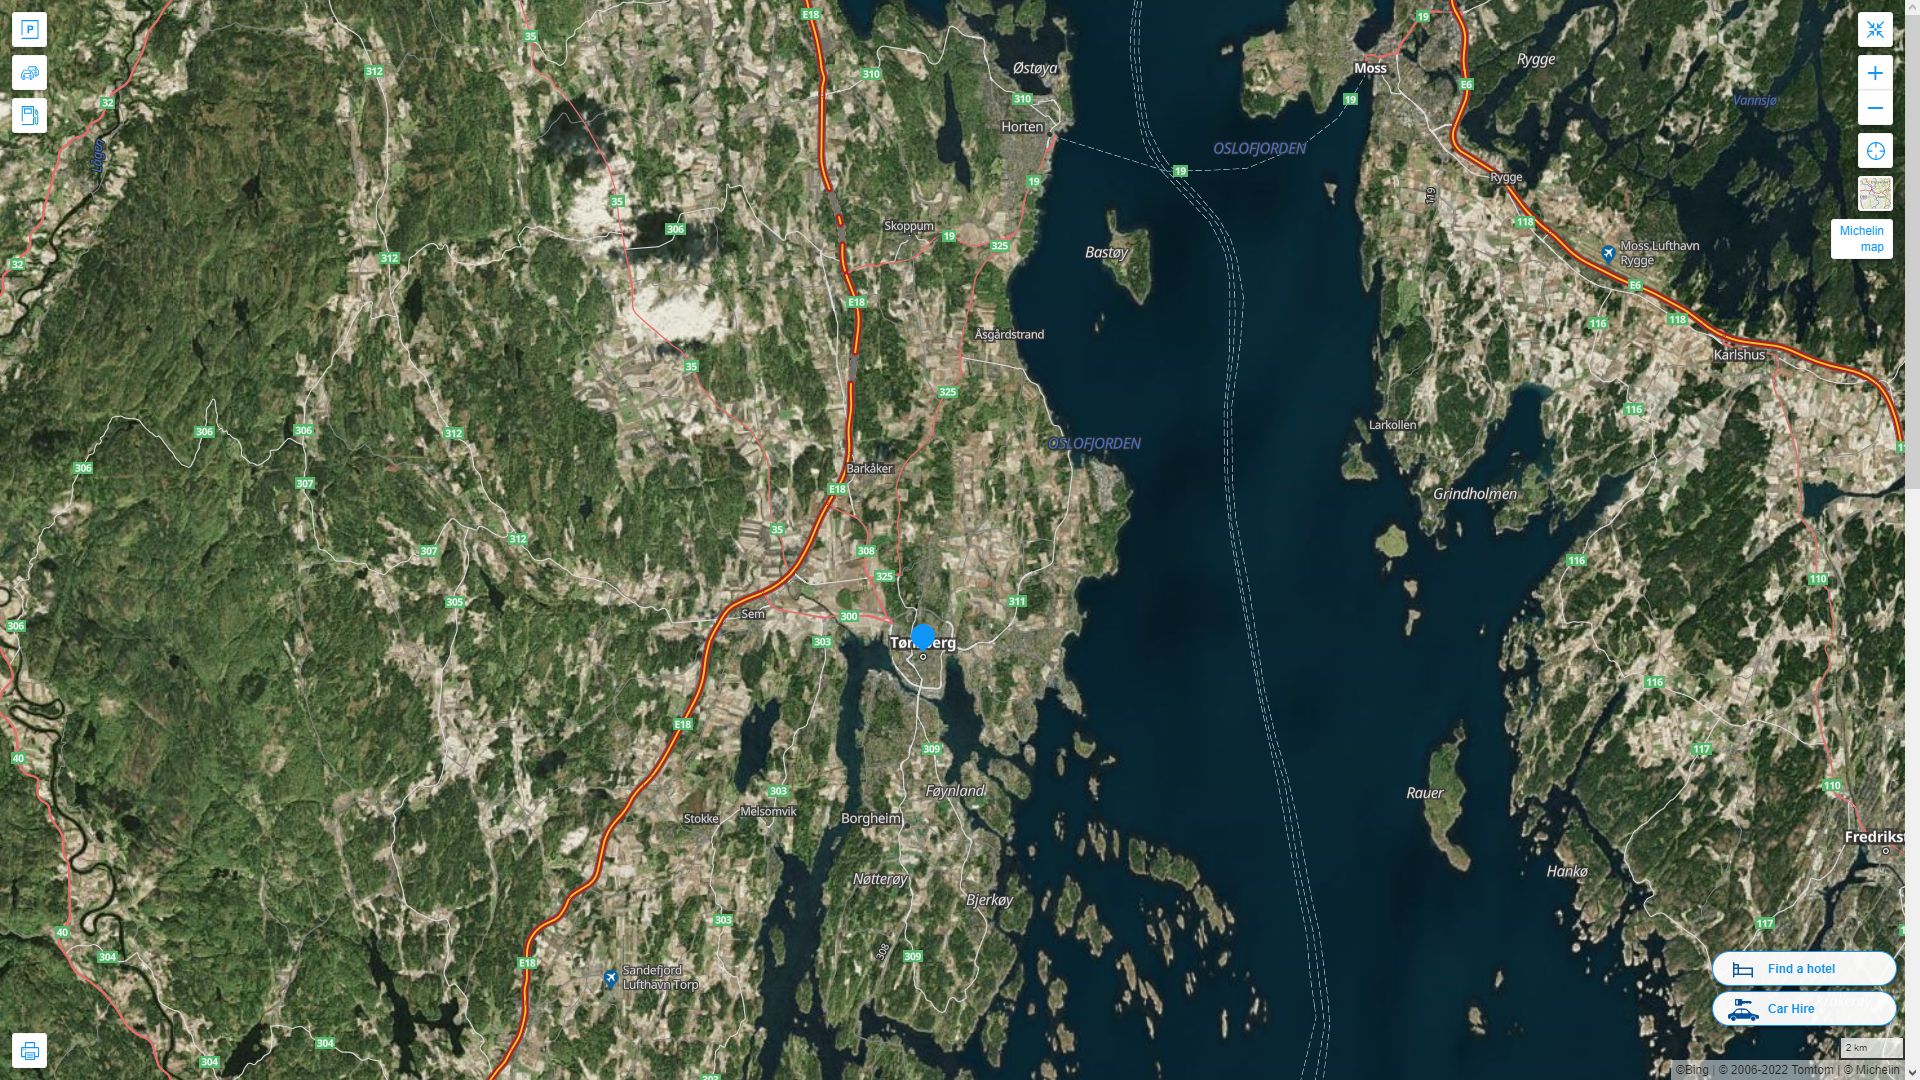 Tonsberg Highway and Road Map with Satellite View